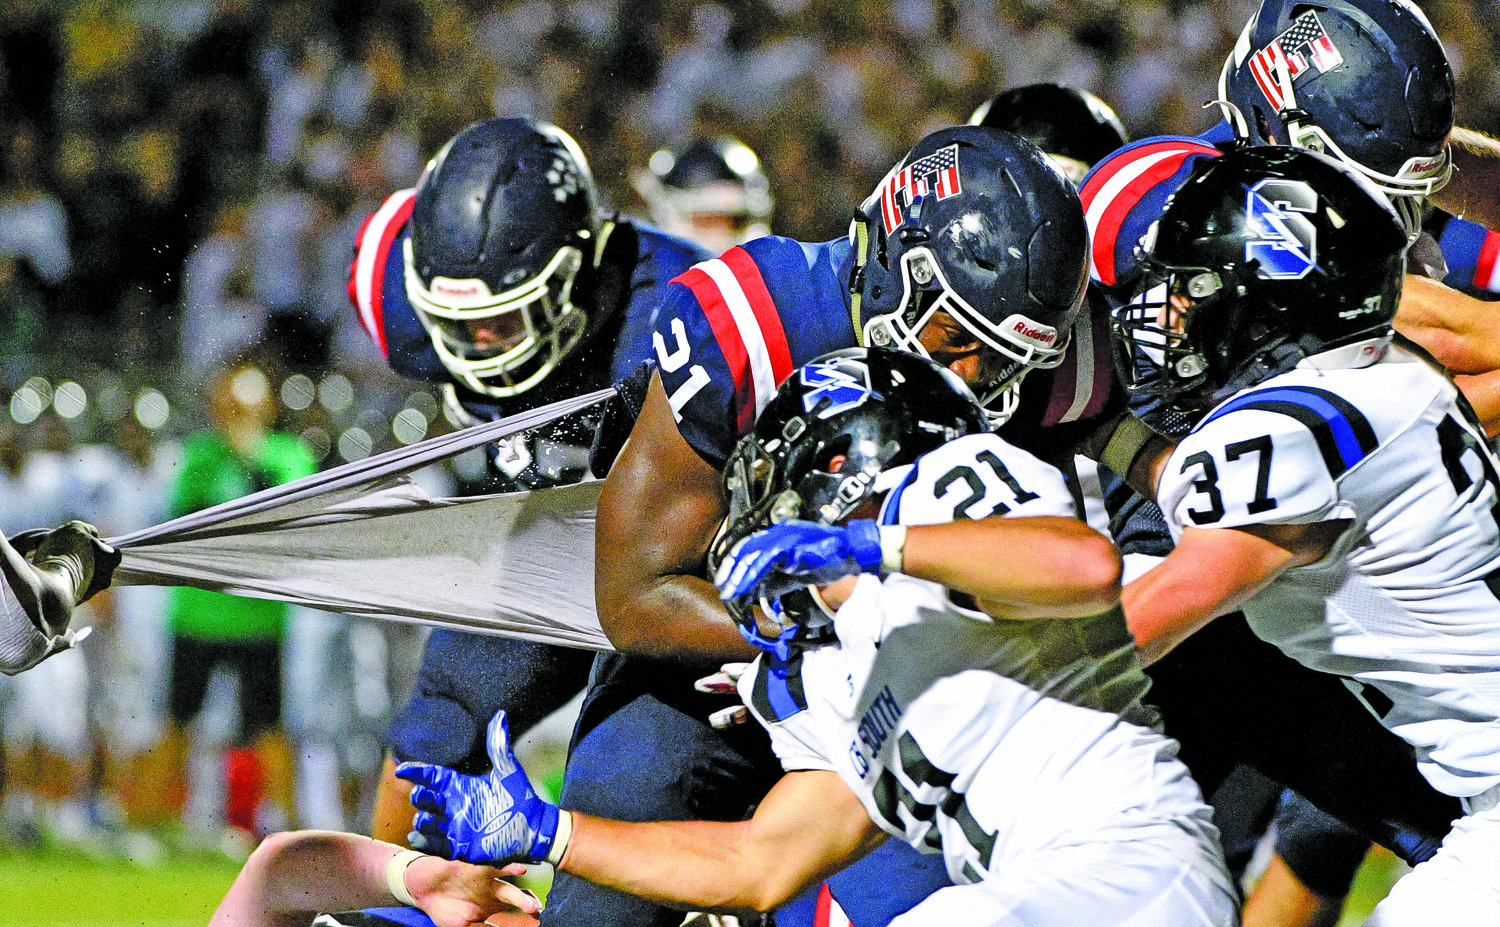 CB East’s Ethan Shine loses his shirt while being tackled by CB South’s Sebastian Pacchione and Devlin Carey.